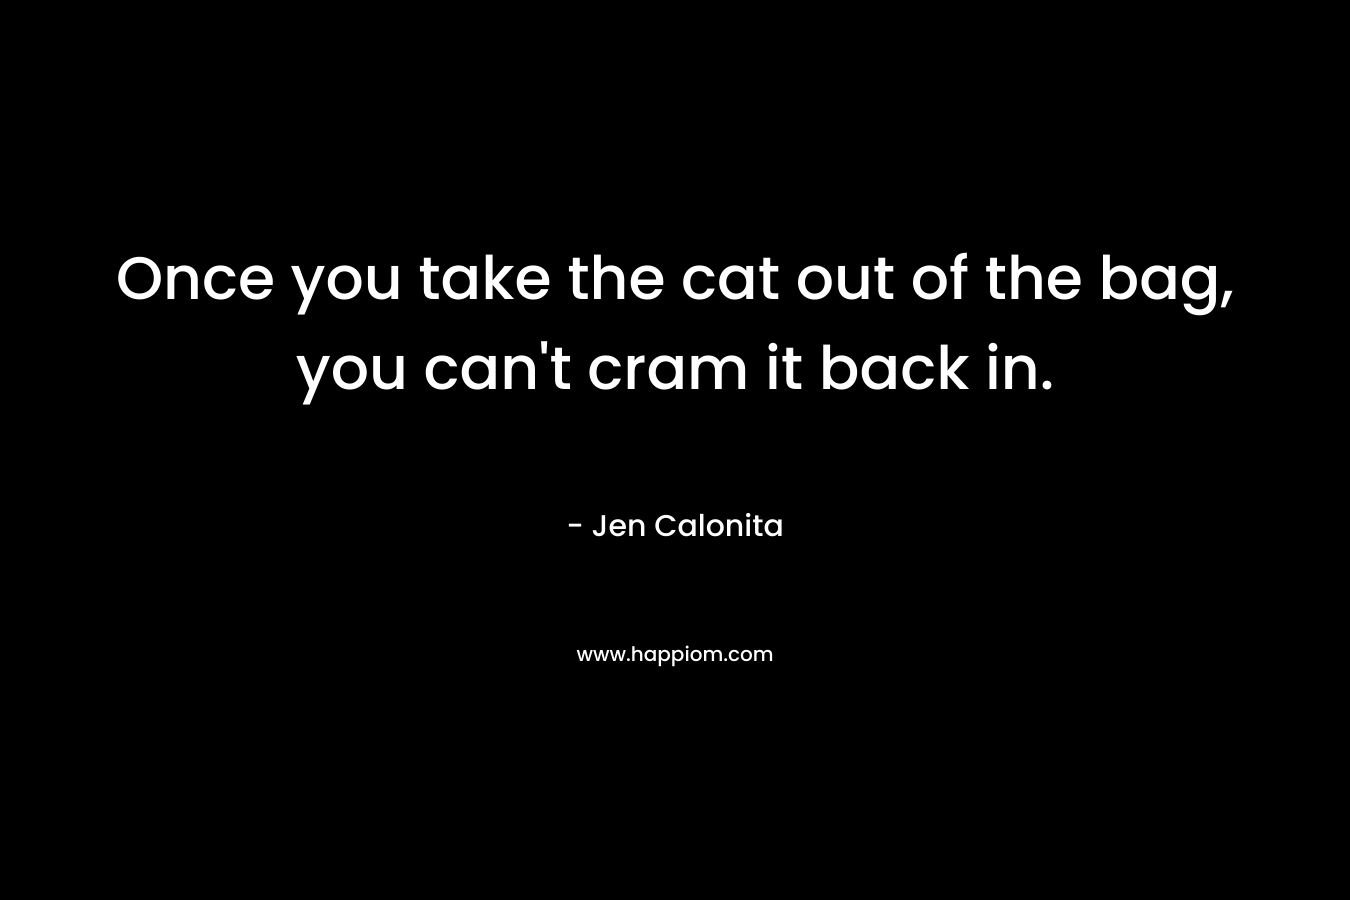 Once you take the cat out of the bag, you can’t cram it back in. – Jen Calonita